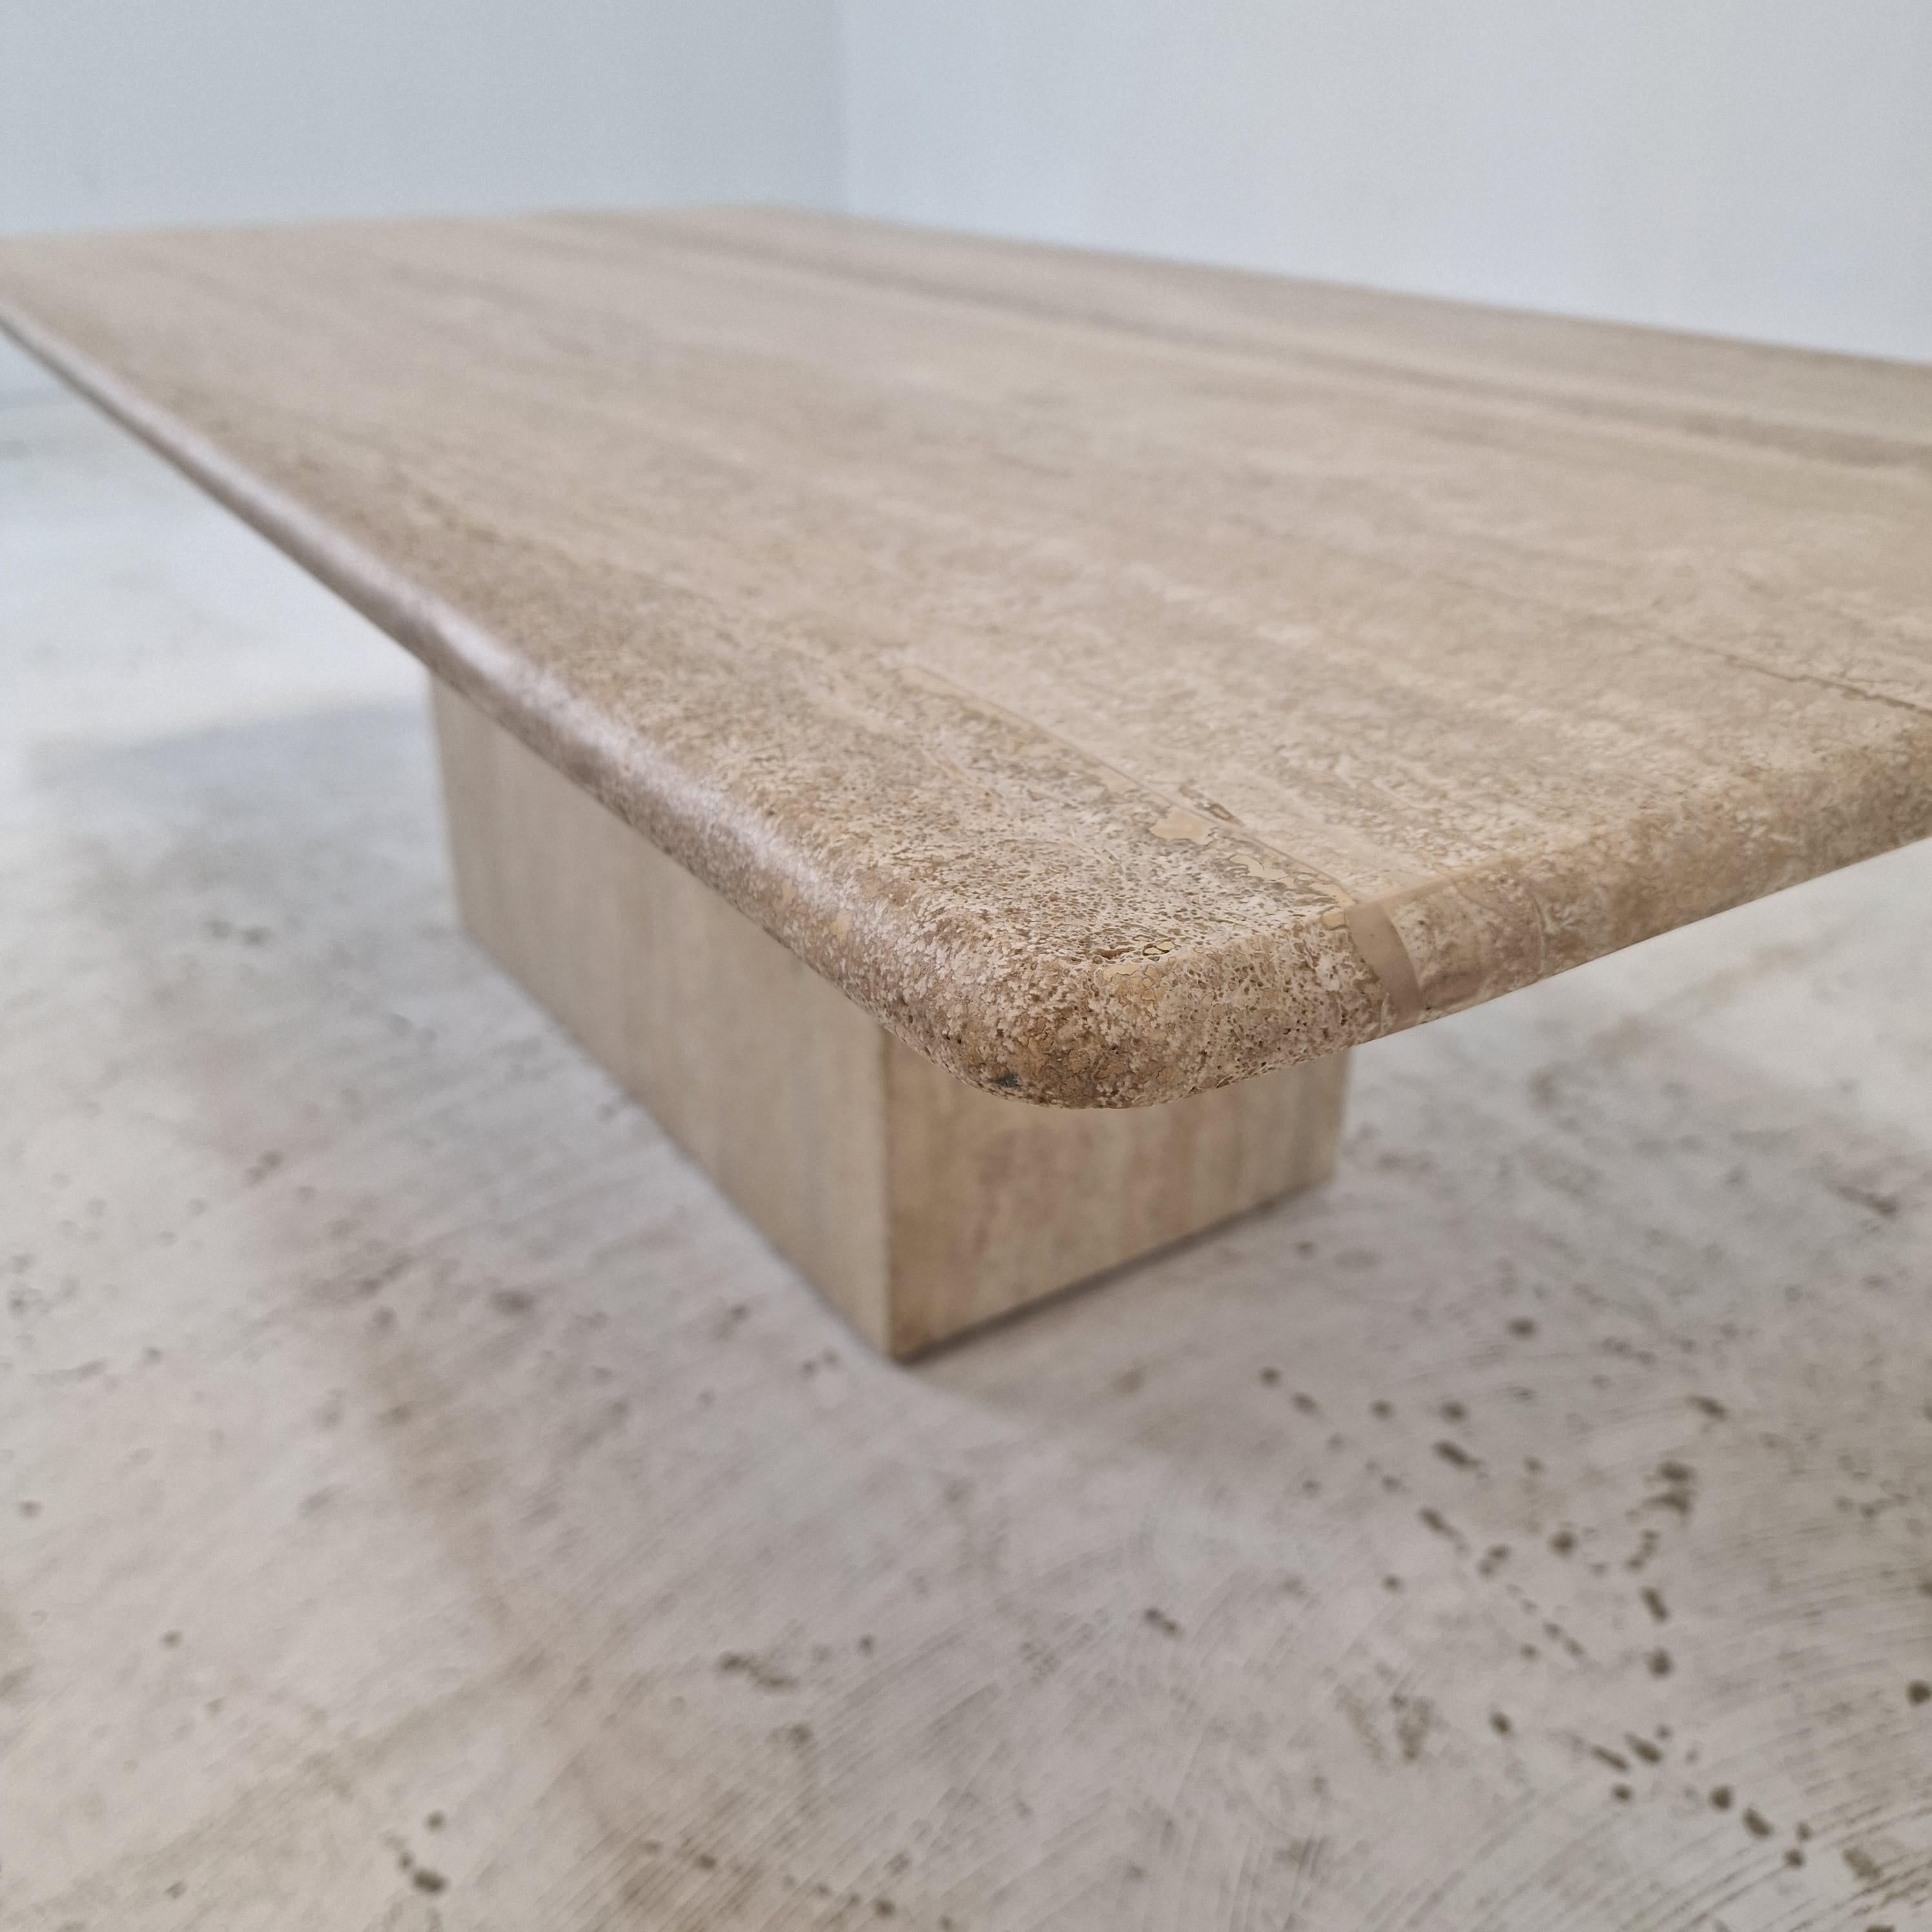 Italian Rectangle Coffee Table in Travertine, 1980s For Sale 6